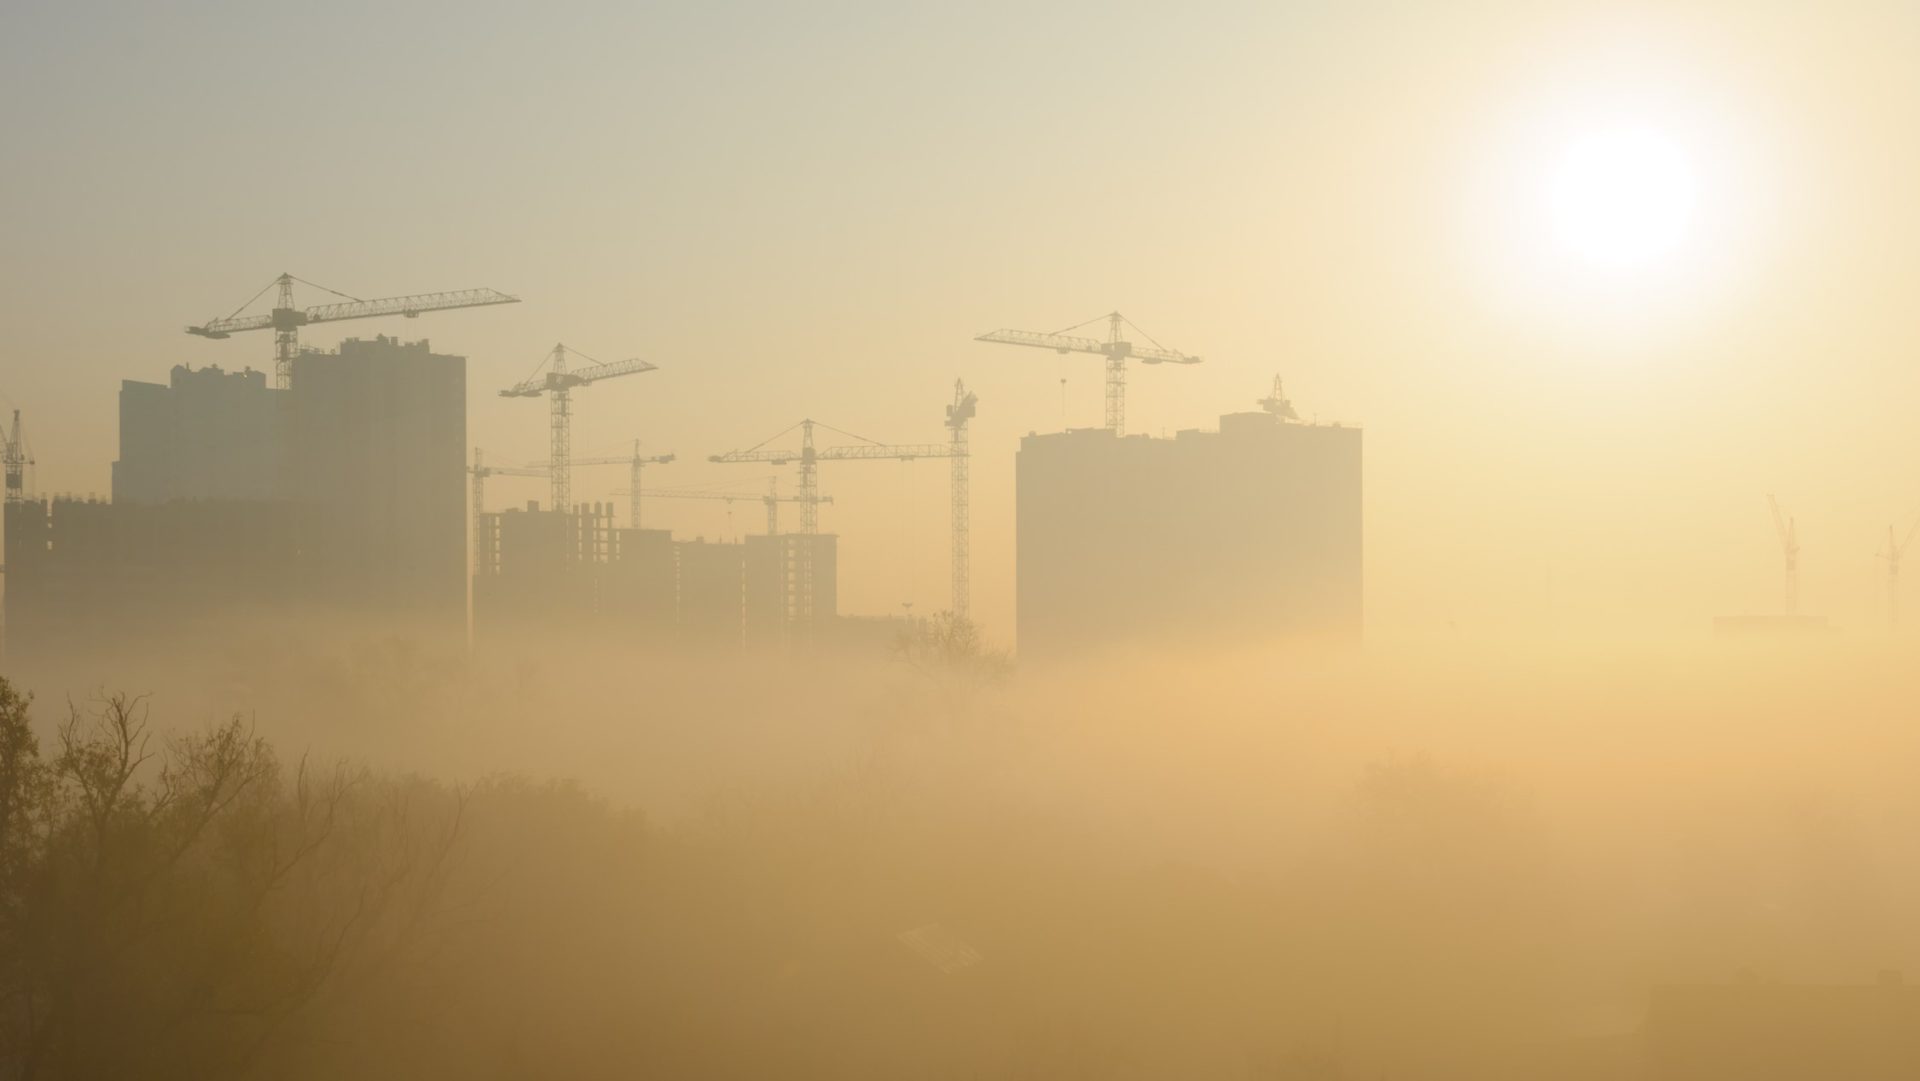 The new Environment Act has implications for air quality standards on construction sites. (Image: Dreamstime)